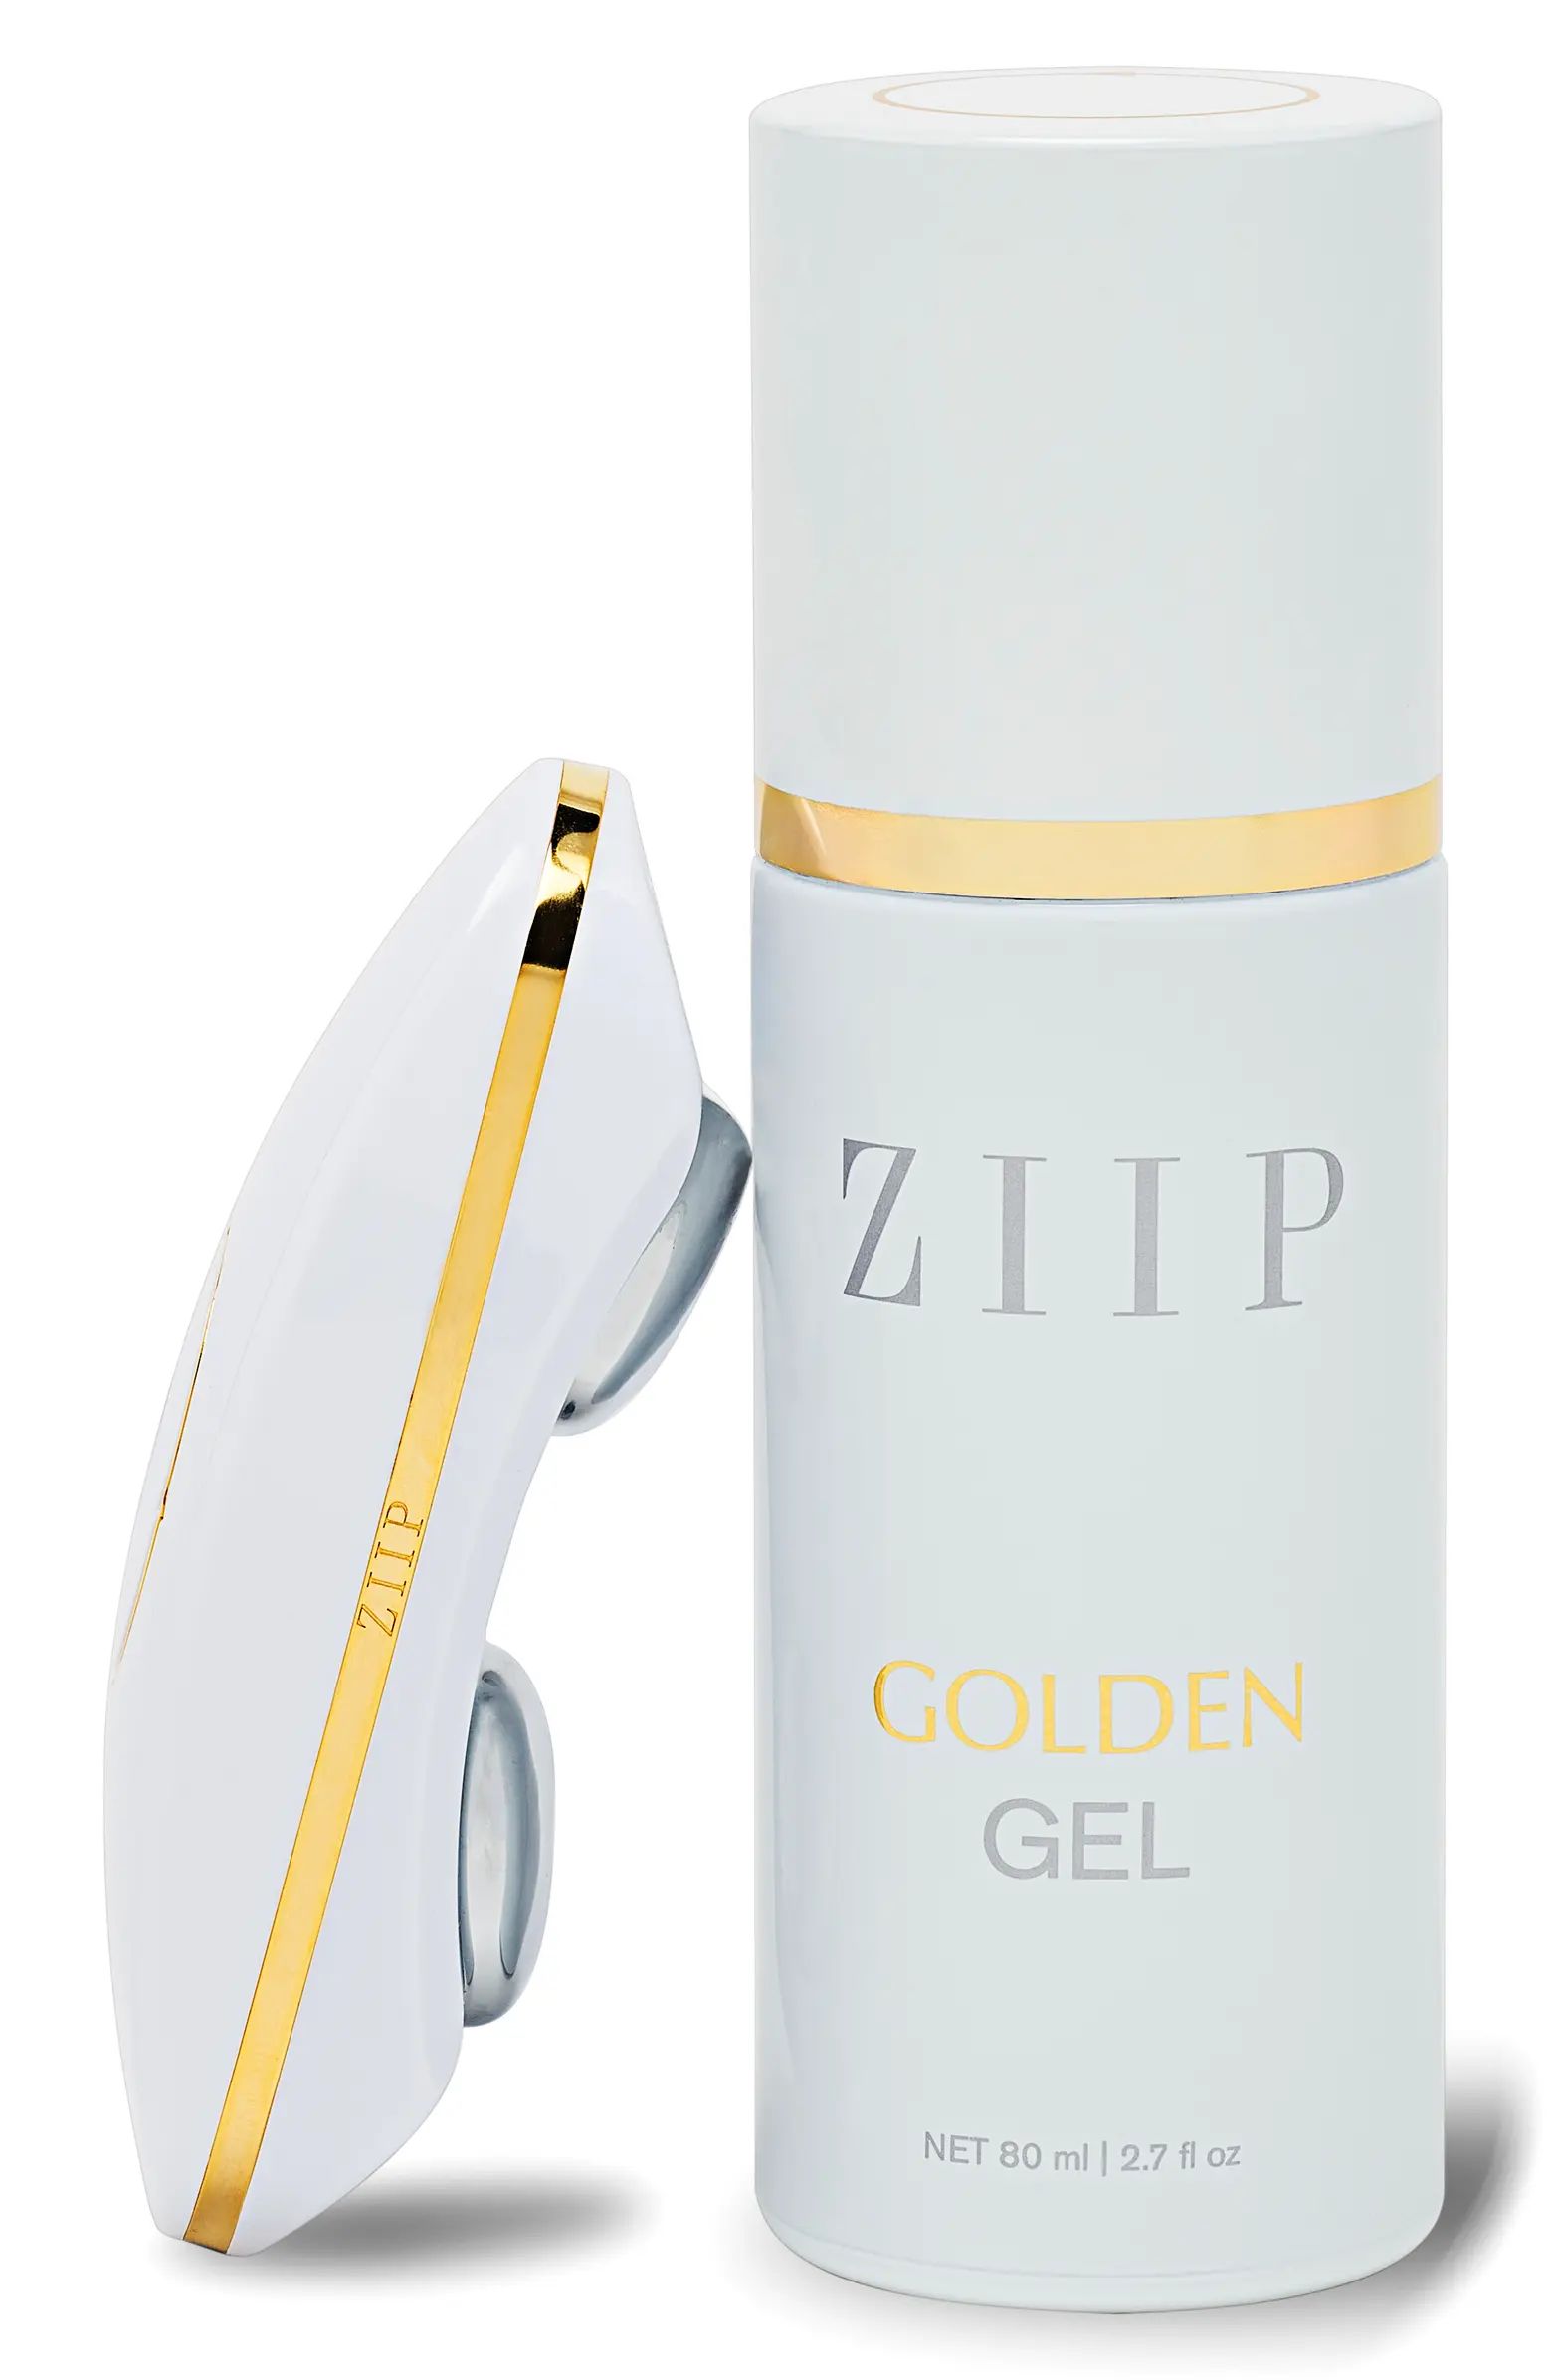 ZIIP Beauty Electrical Facial Device | Nordstrom | Nordstrom